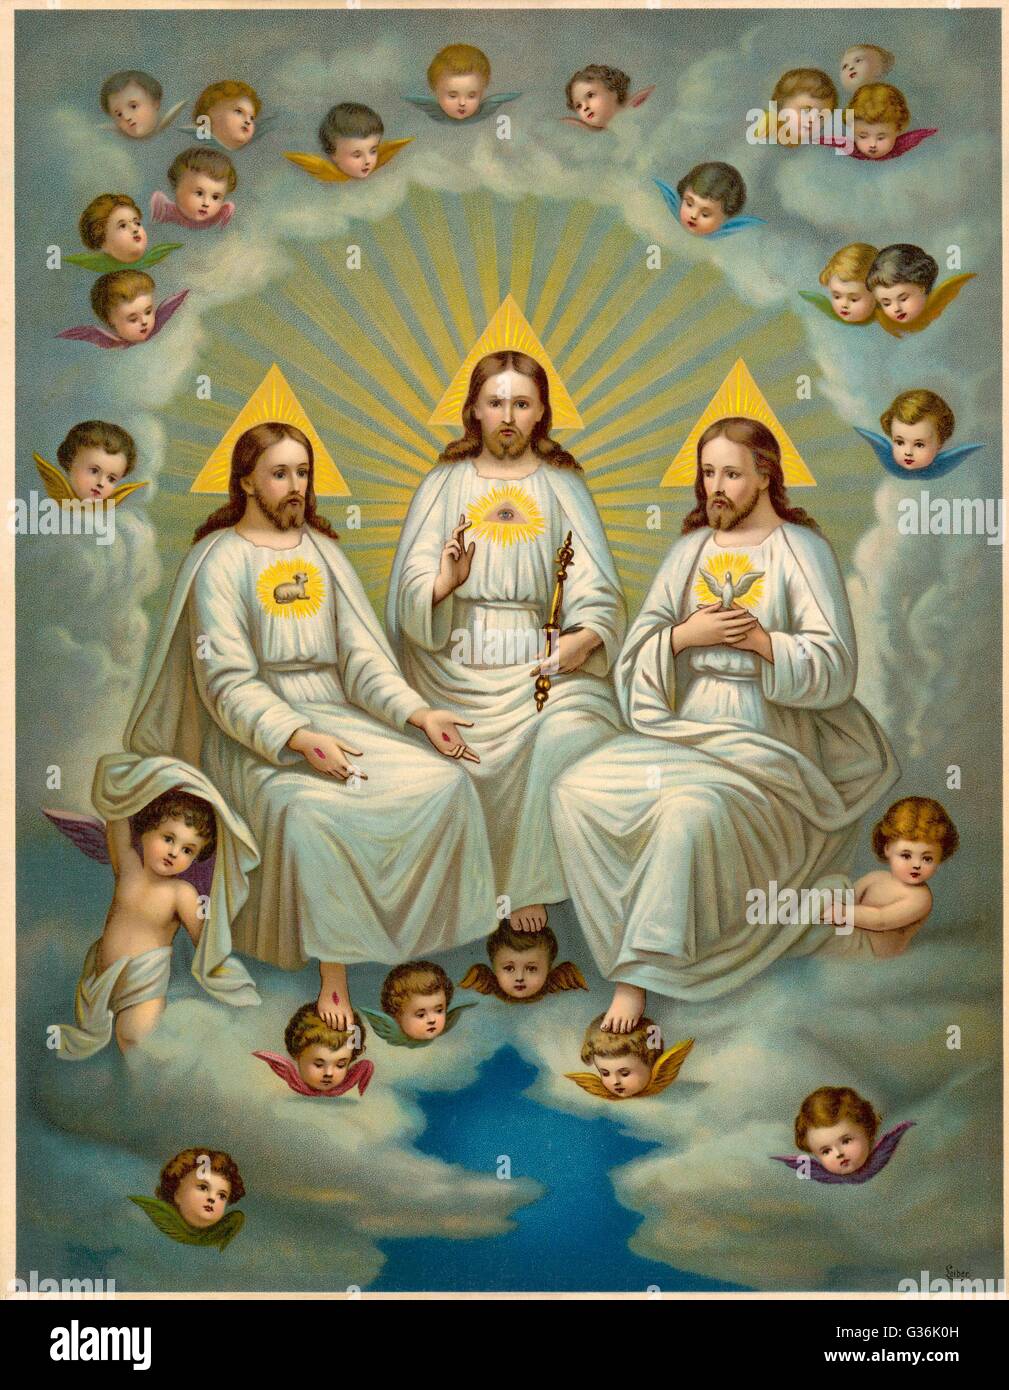 A depiction of the Holy Trinity (Father, Son and Holy Spirit), with cherubs and putti.            Date: 19th century Stock Photo